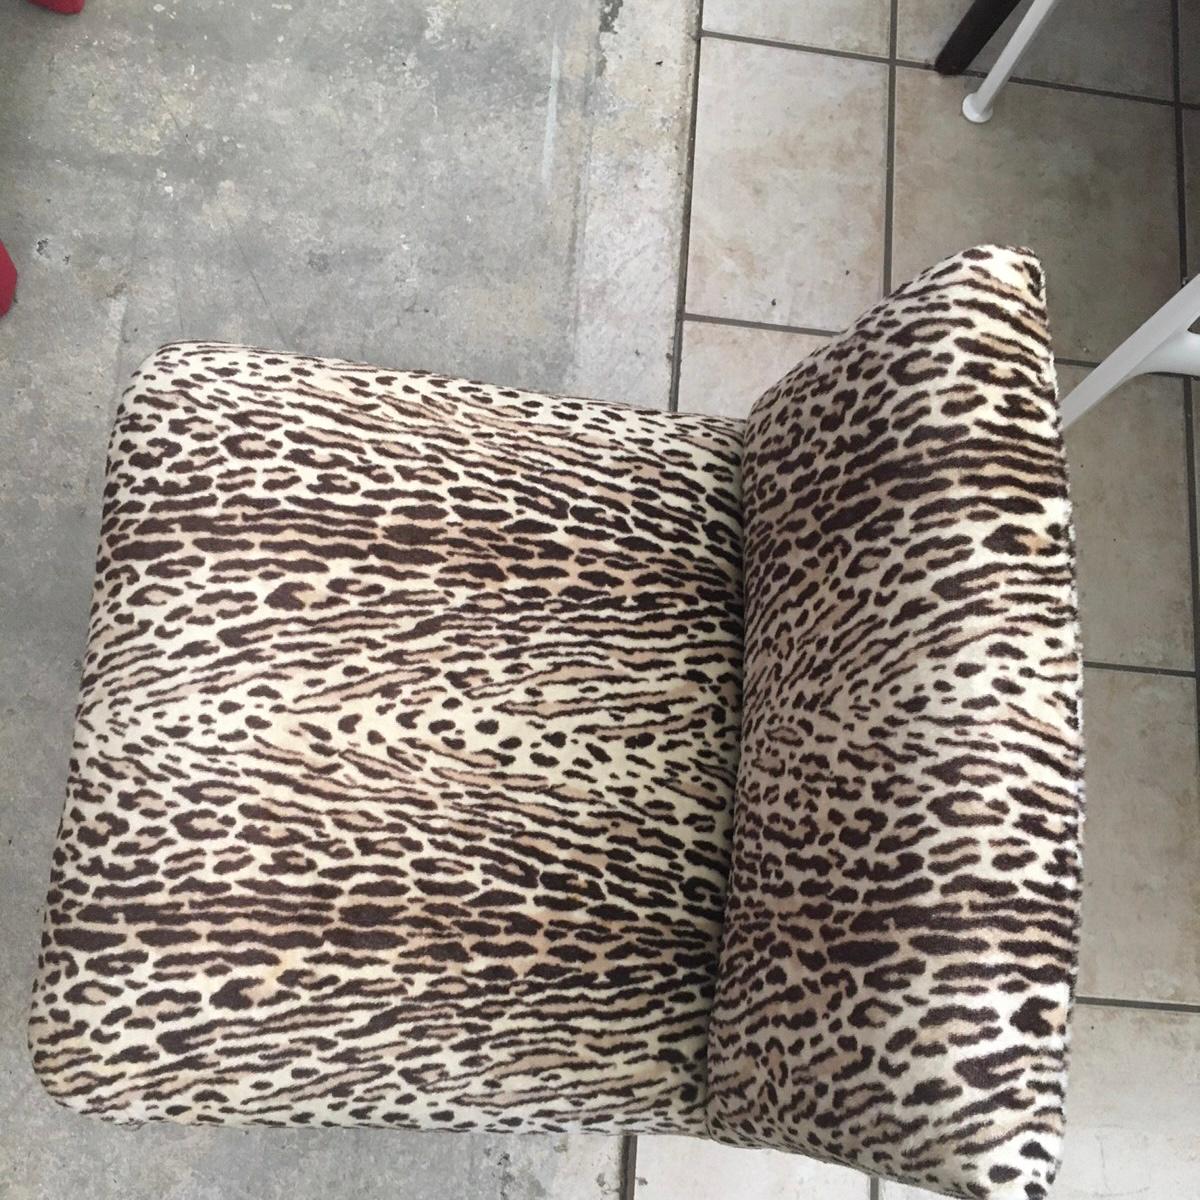  Rare Milo Baughman Slipper Chair In Good Condition For Sale In Palm Springs, CA